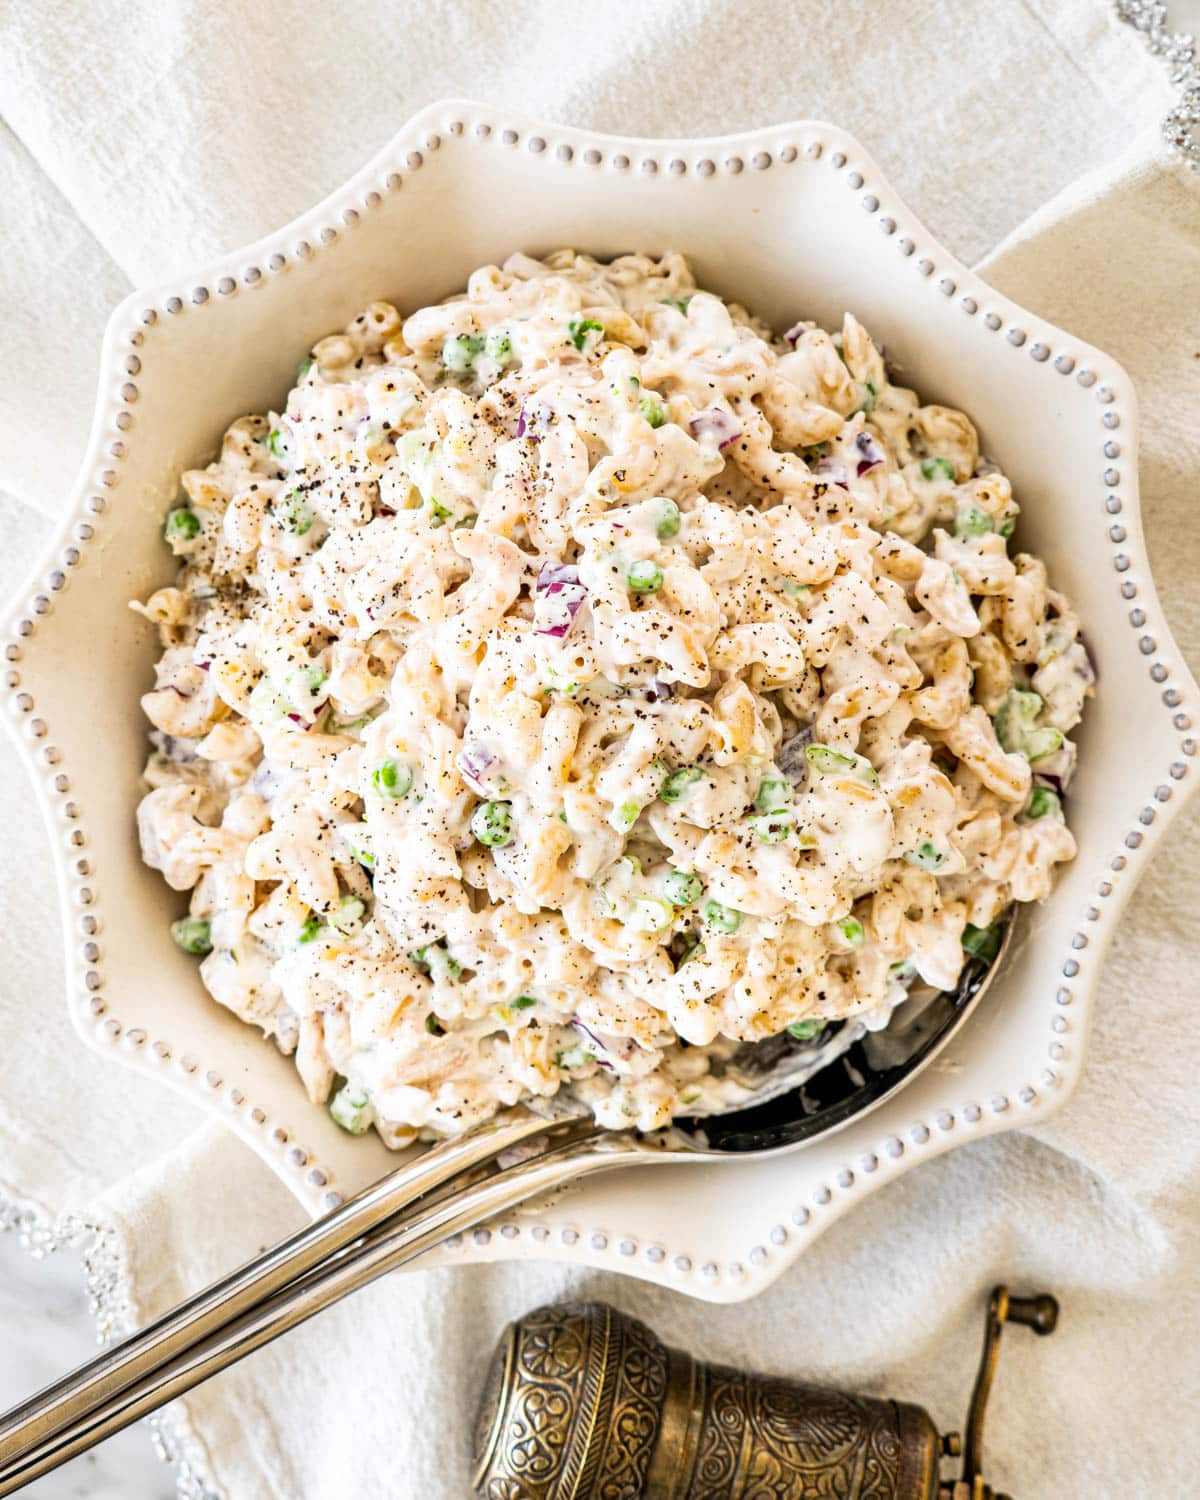 How To Make Tuna Salad With Elbow Noodles?